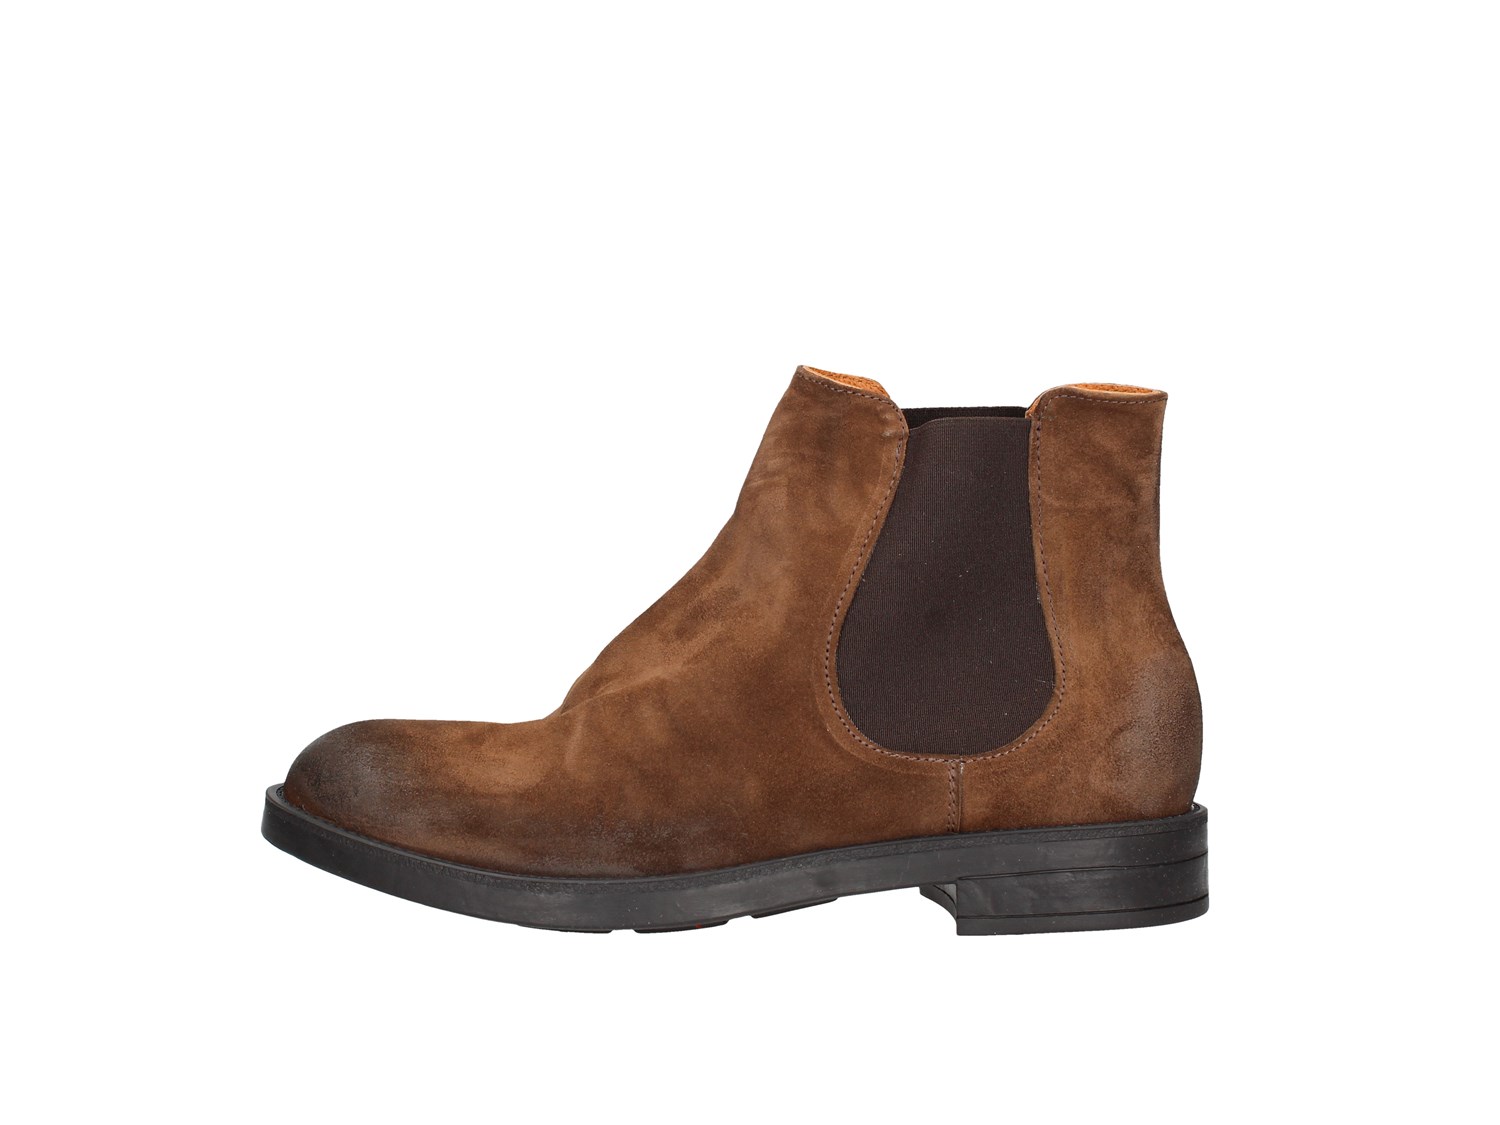 Eveet 20700 Mud Shoes Man Boots